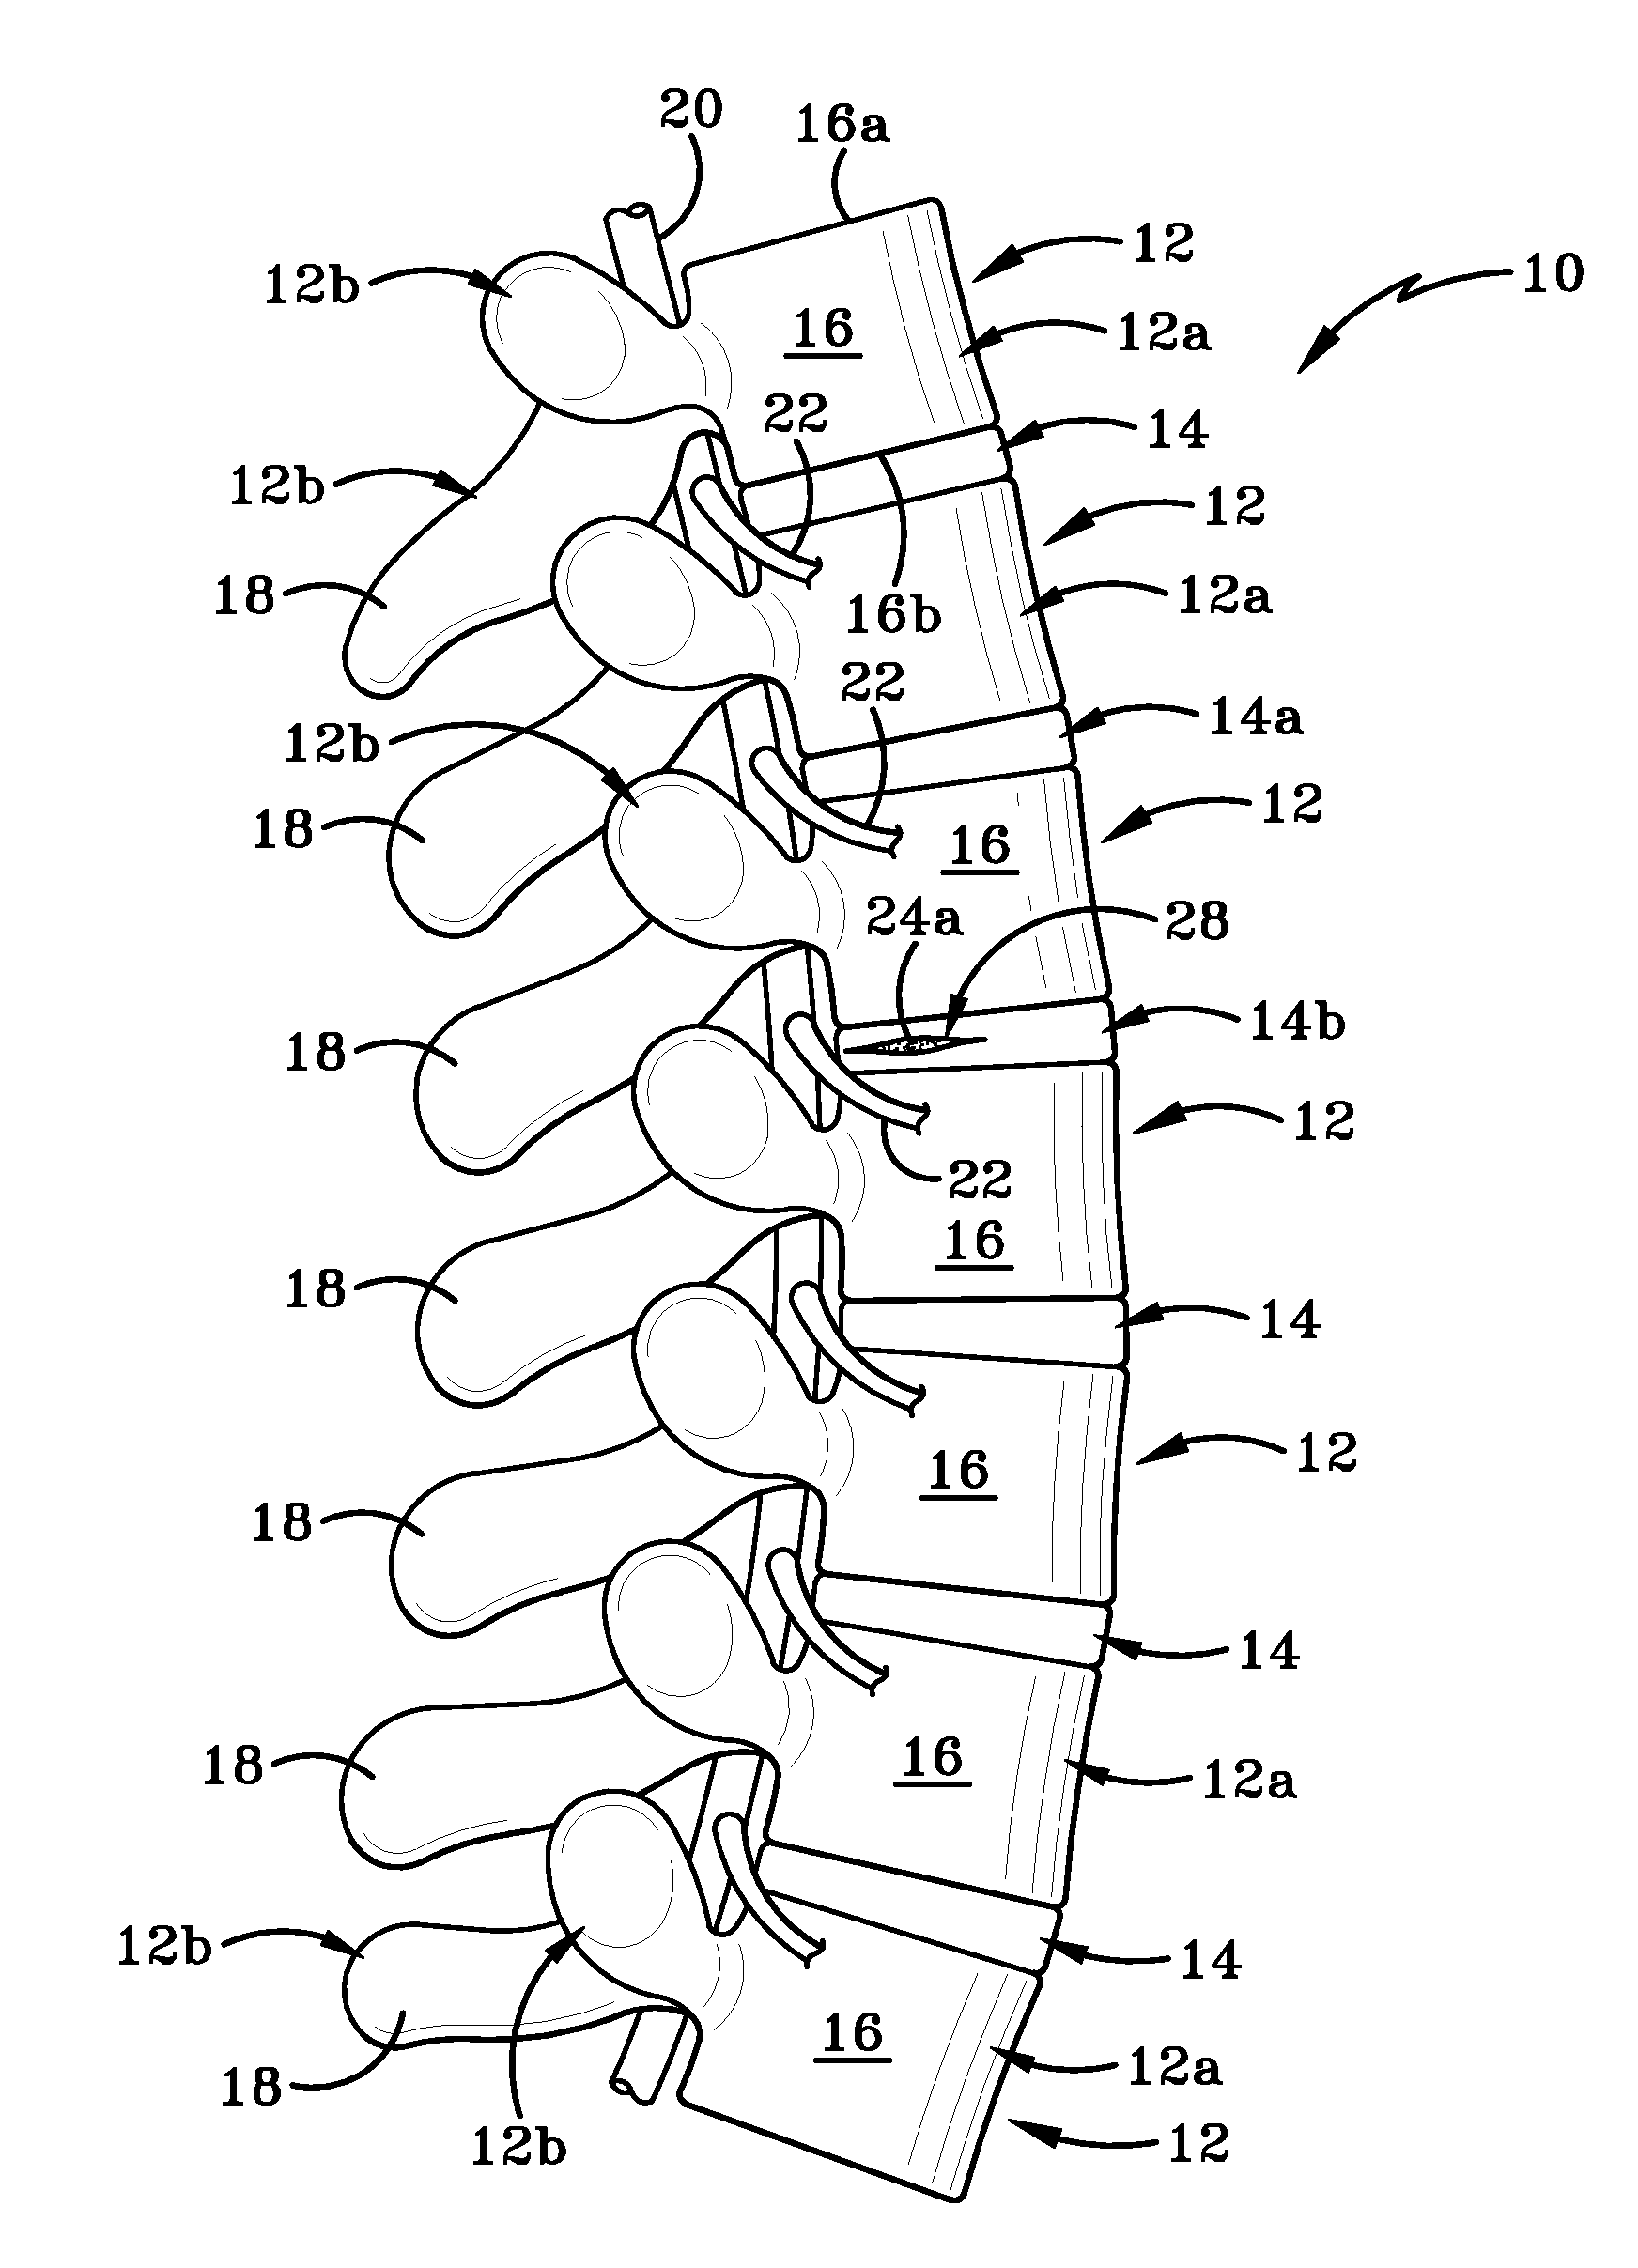 Nucleus pulposus spinal implant and method of using the same